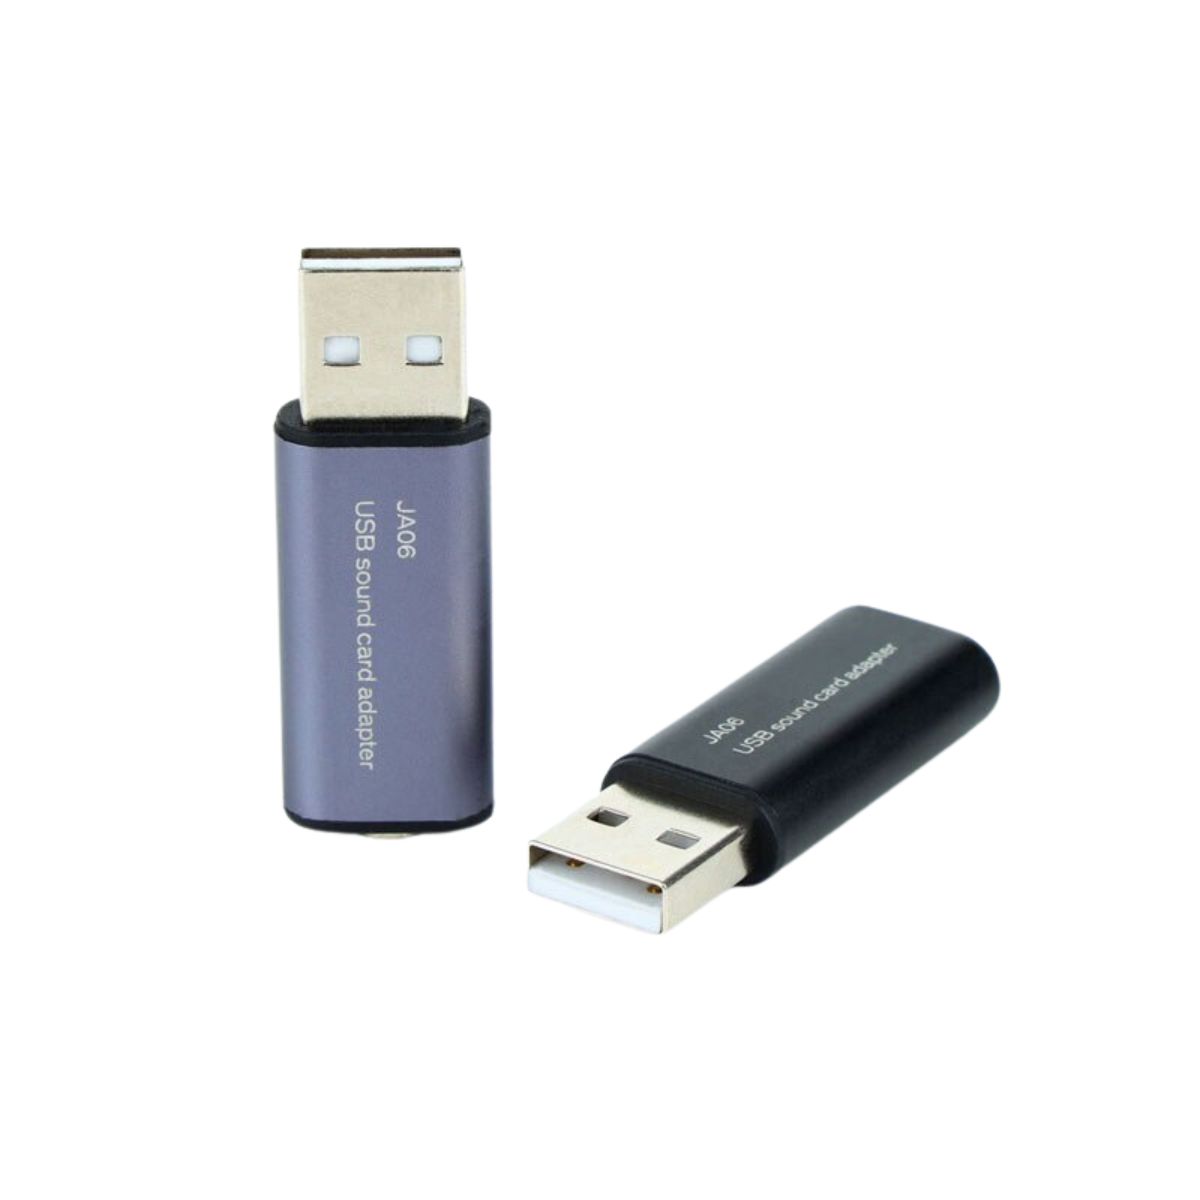 JCALLY JA06 USB External Sound Card Converter - Connects 3.5mm Earphones with Mic